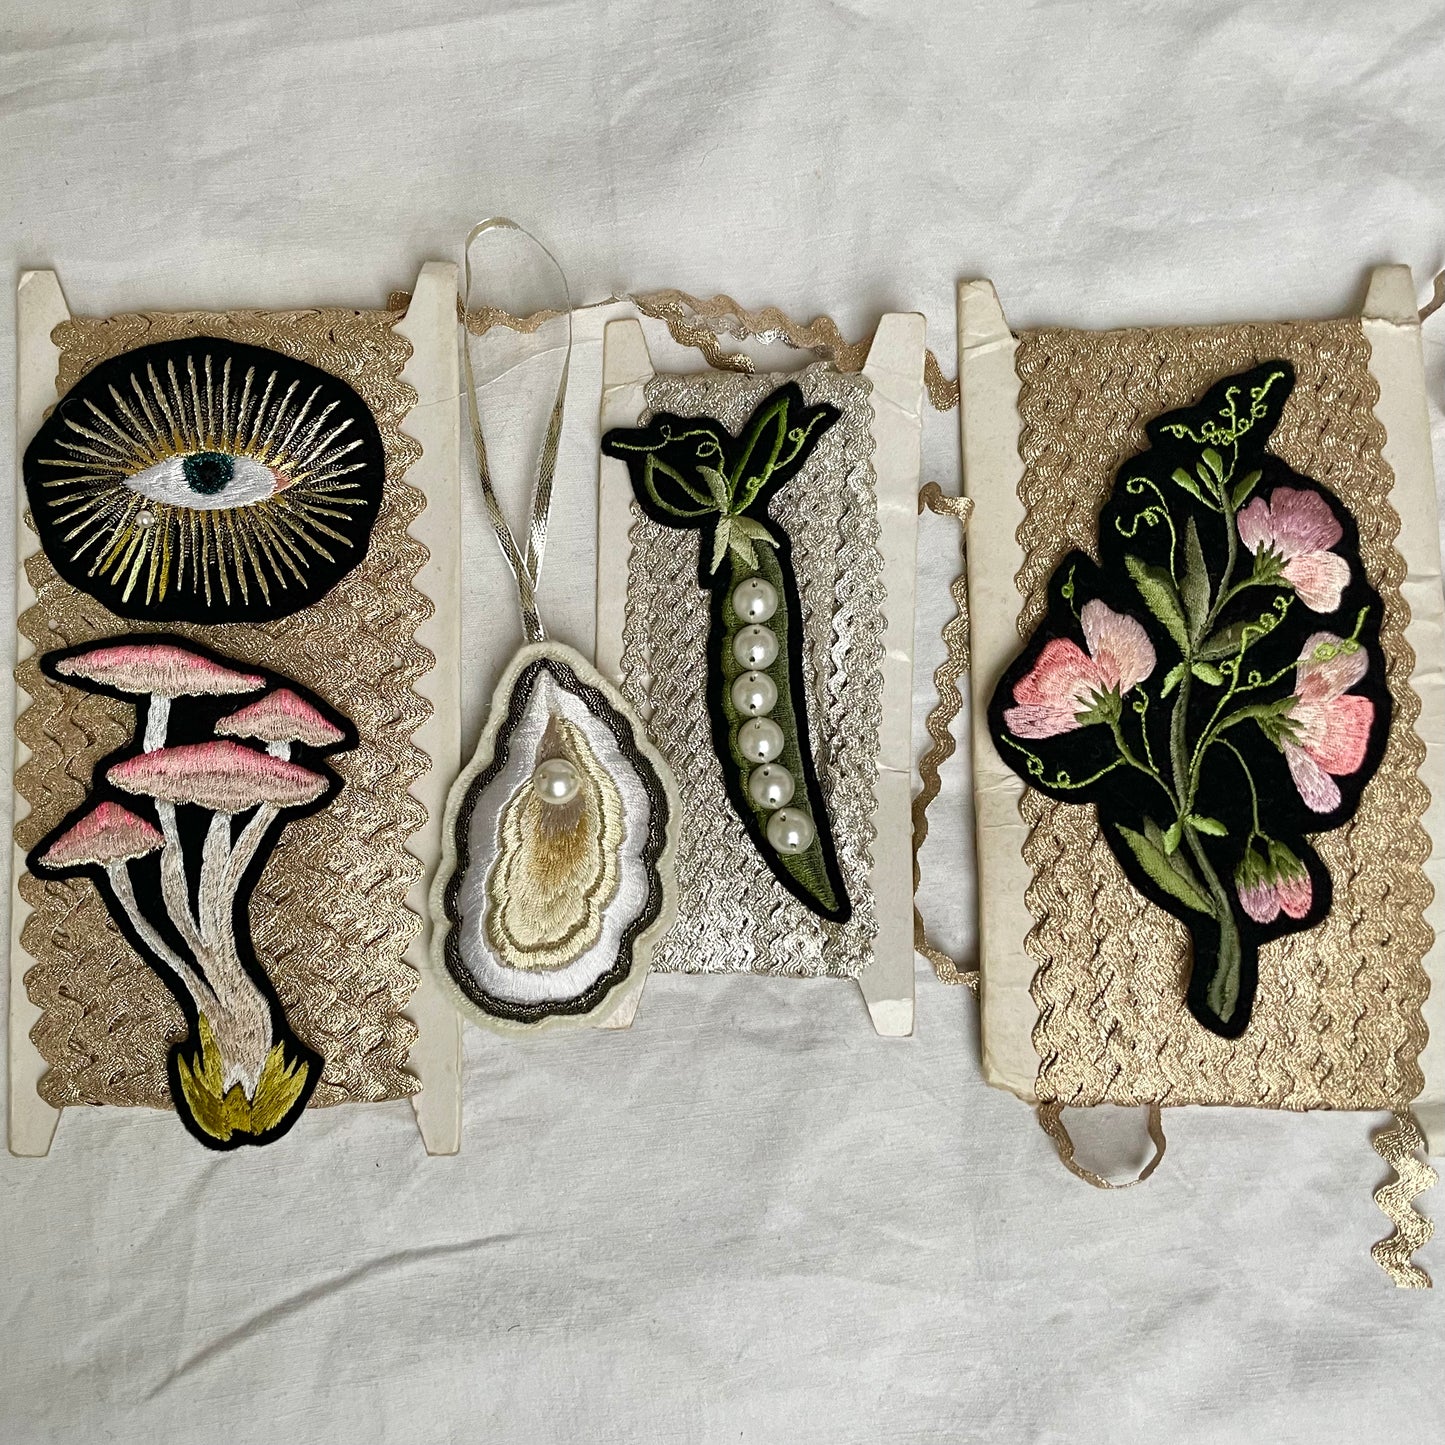 Embroidered patches on vintage trim